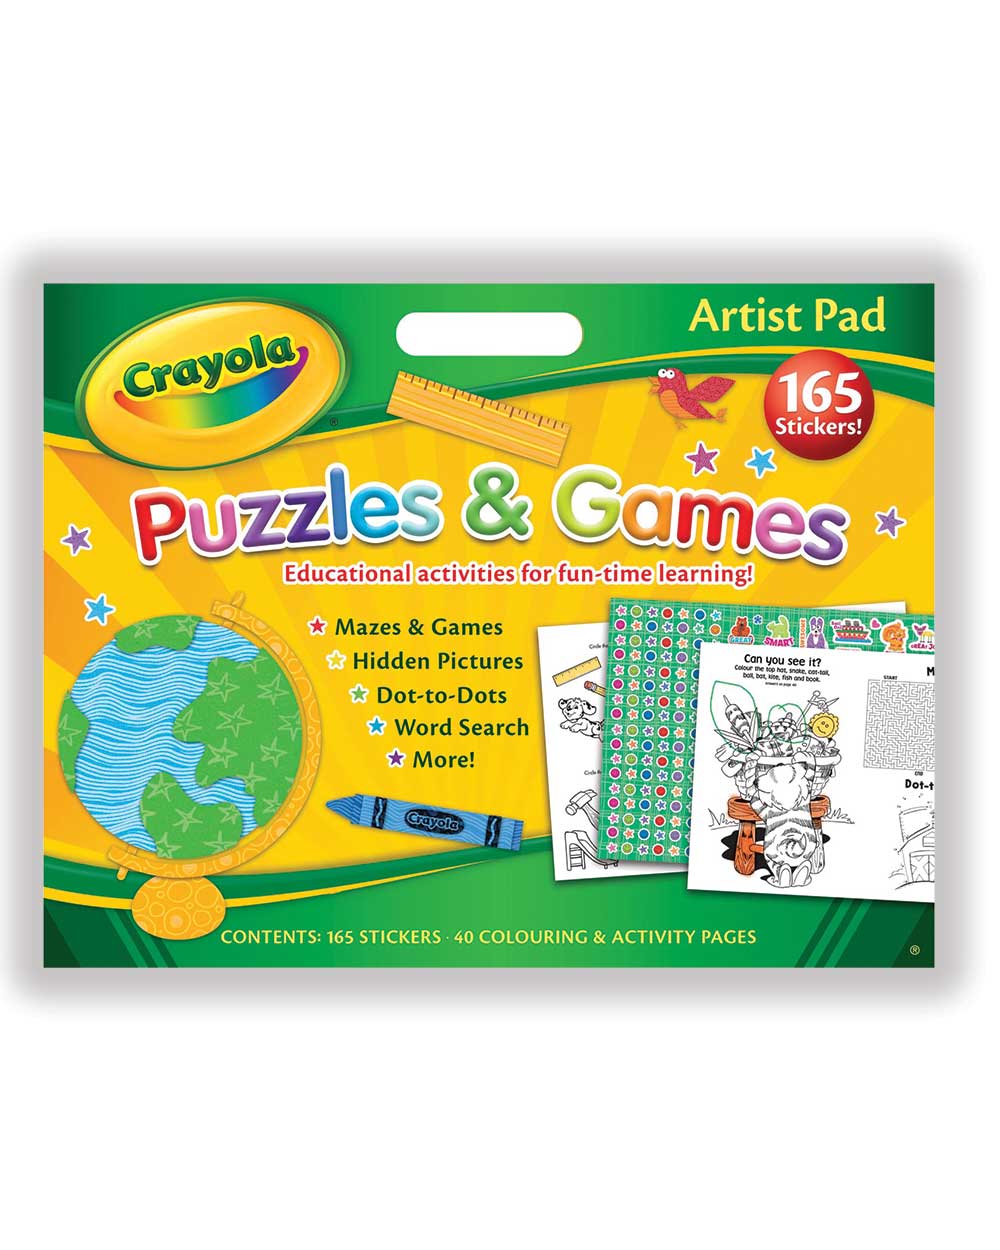 Crayola artist pad puzzles * games pack on a white background